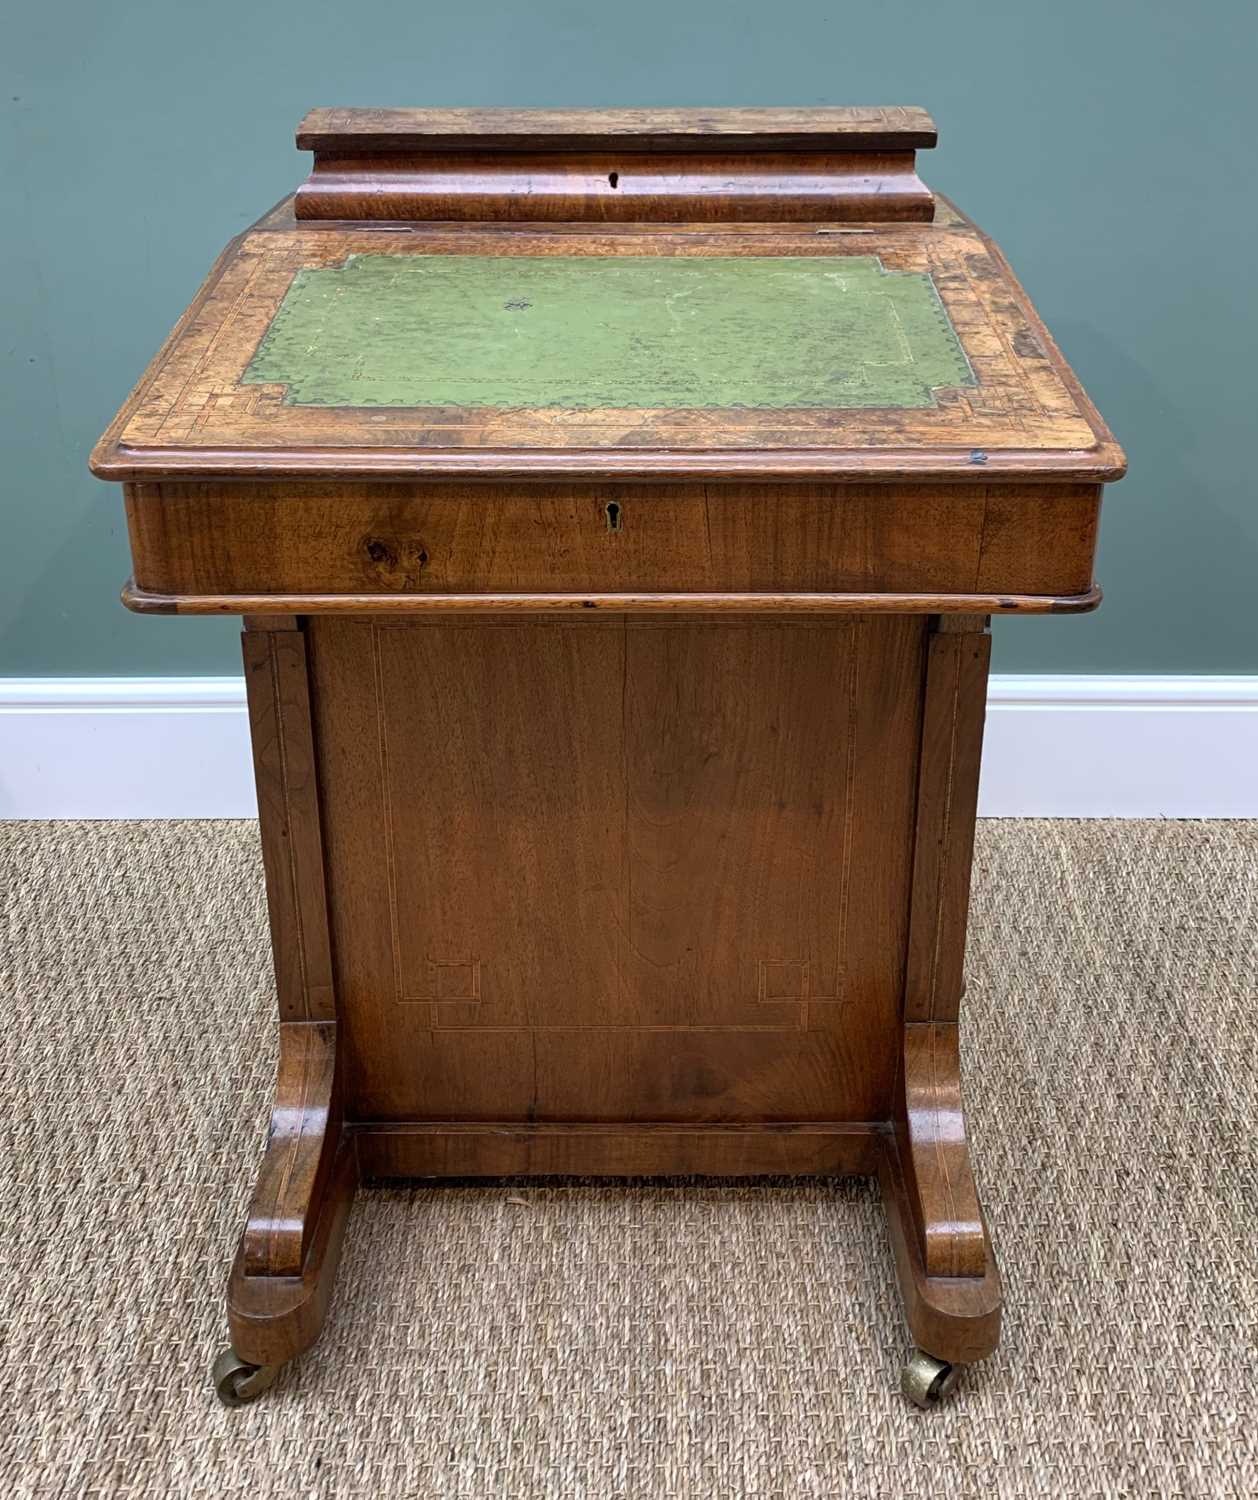 LATE VICTORIAN WALNUT DAVENPORT DESK, satinwood cross-banded decoration with stationery